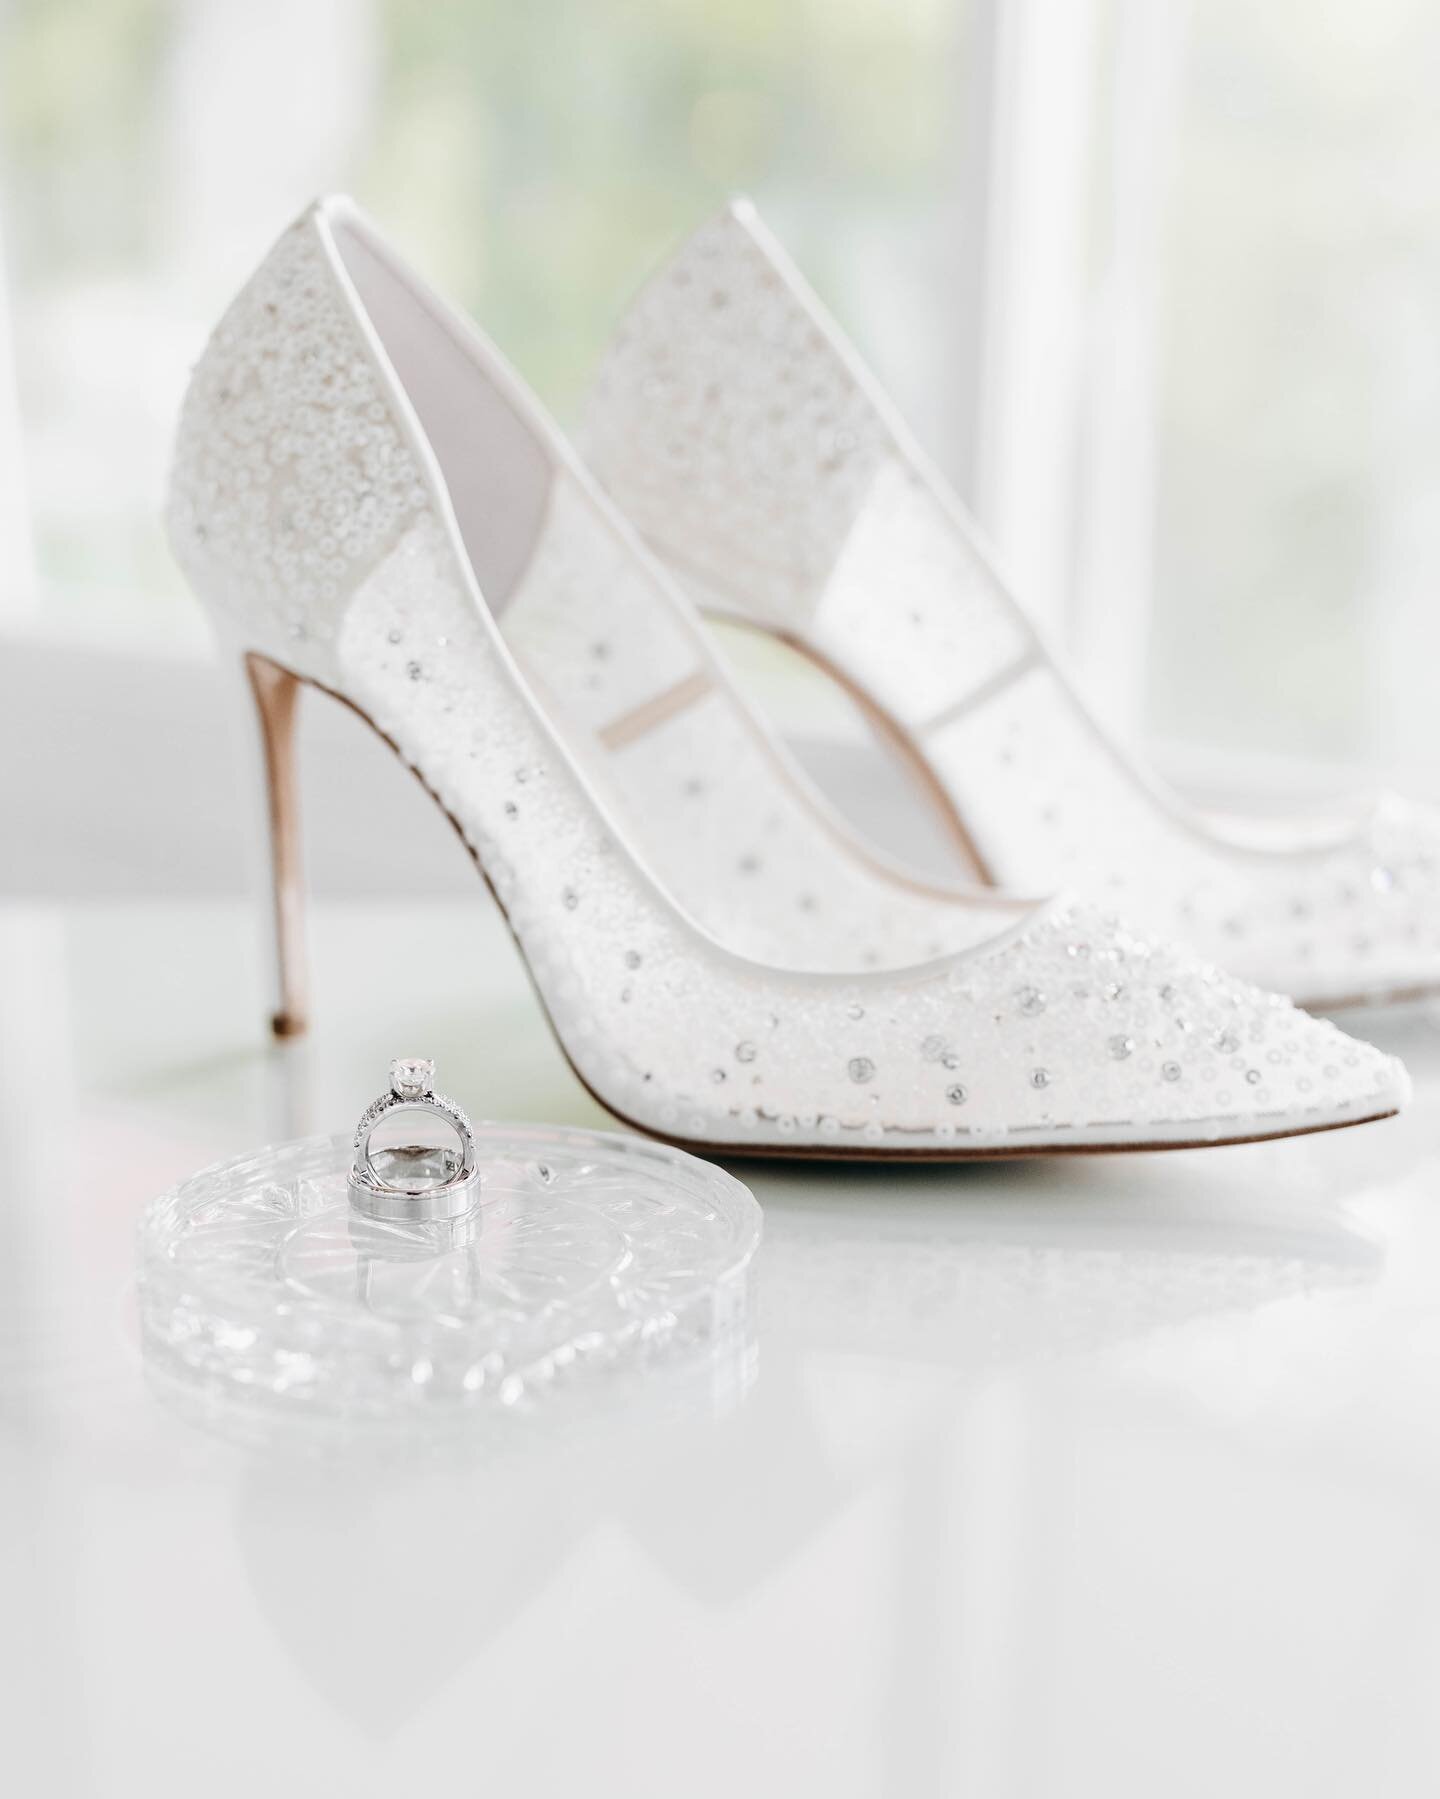 So this is love&hellip; 

#cinderella #shoes #bridalshoes #glassslipper #details #swoon #bride #wedding #weddingphotography #heels #disneyvibes #perfection